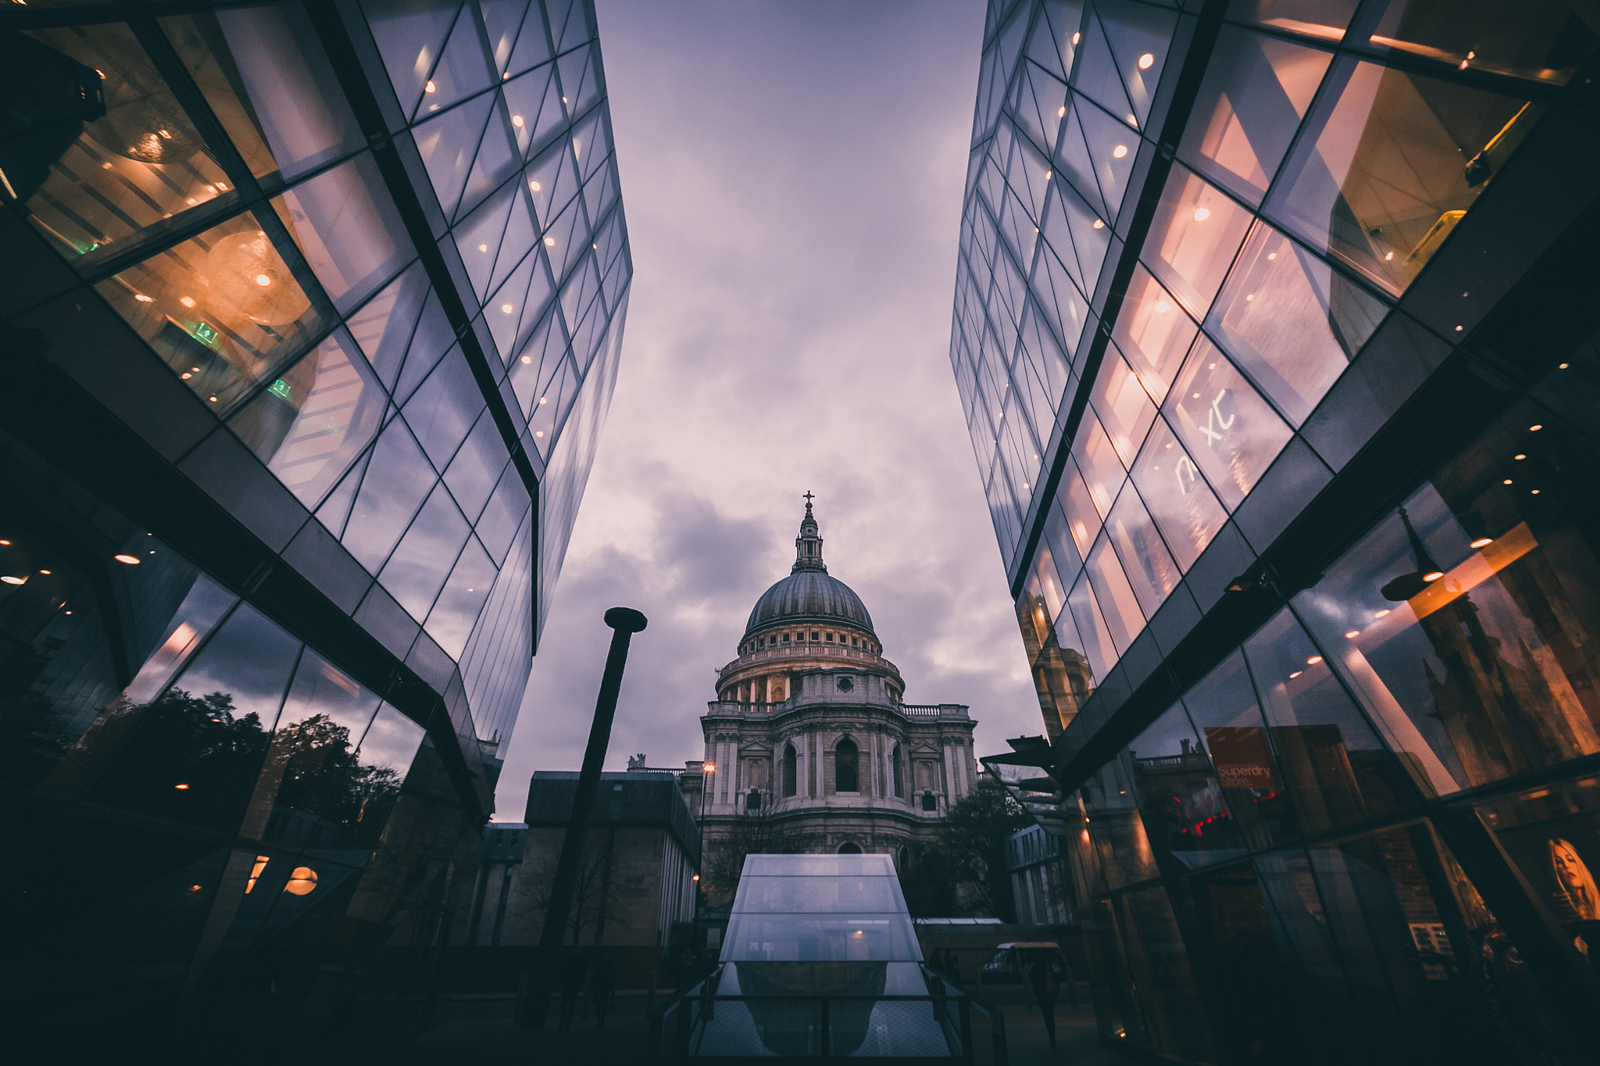 Behind The Scene: Shooting St Paul's Cathedral in London